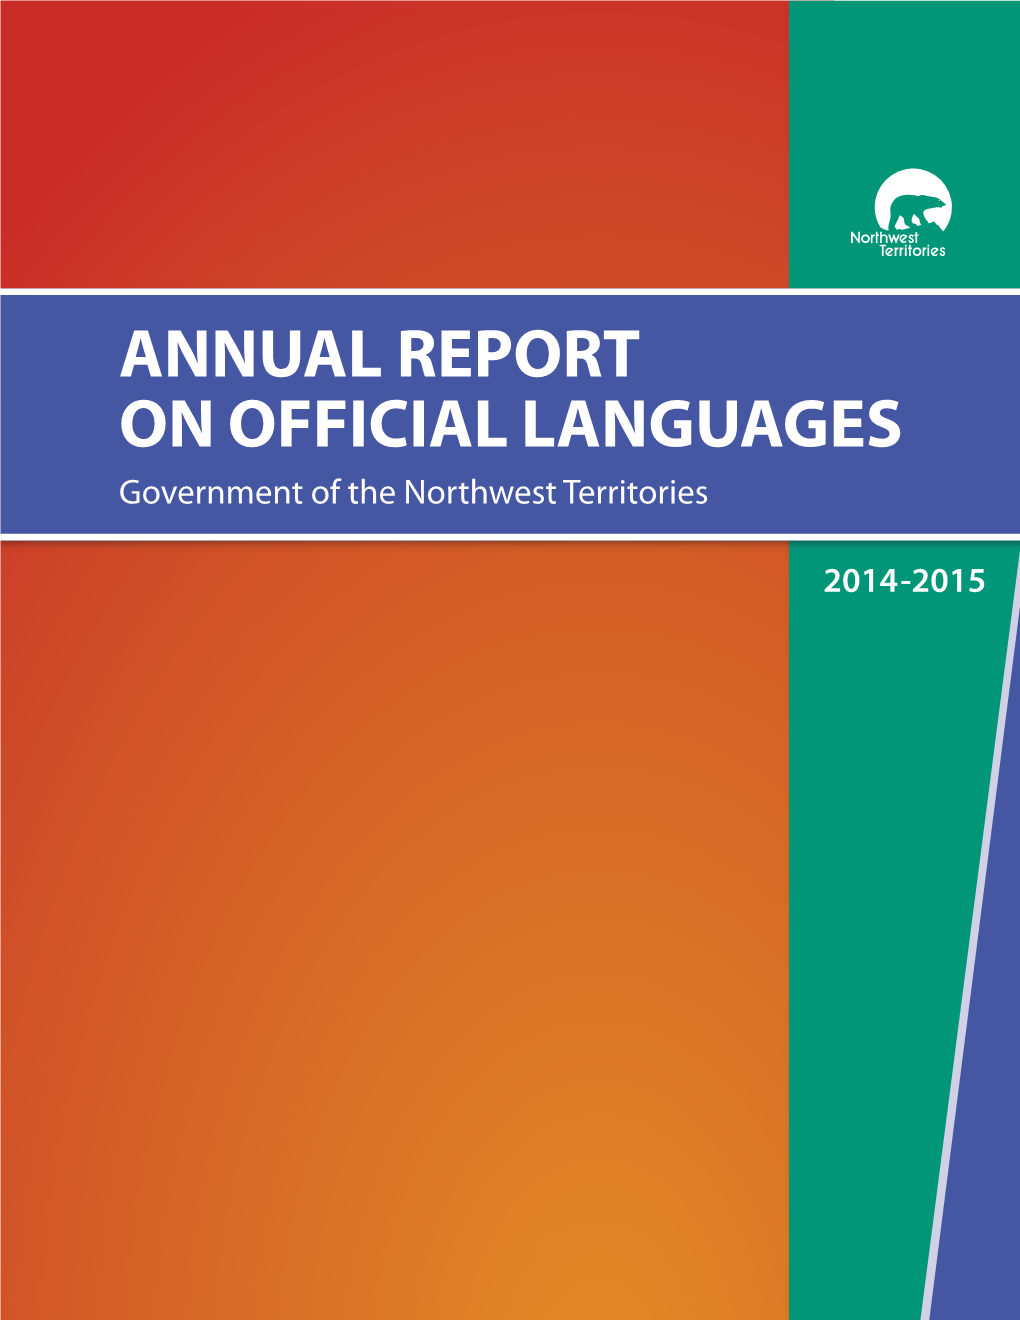 ANNUAL REPORT on OFFICIAL LANGUAGES Government of the Northwest Territories